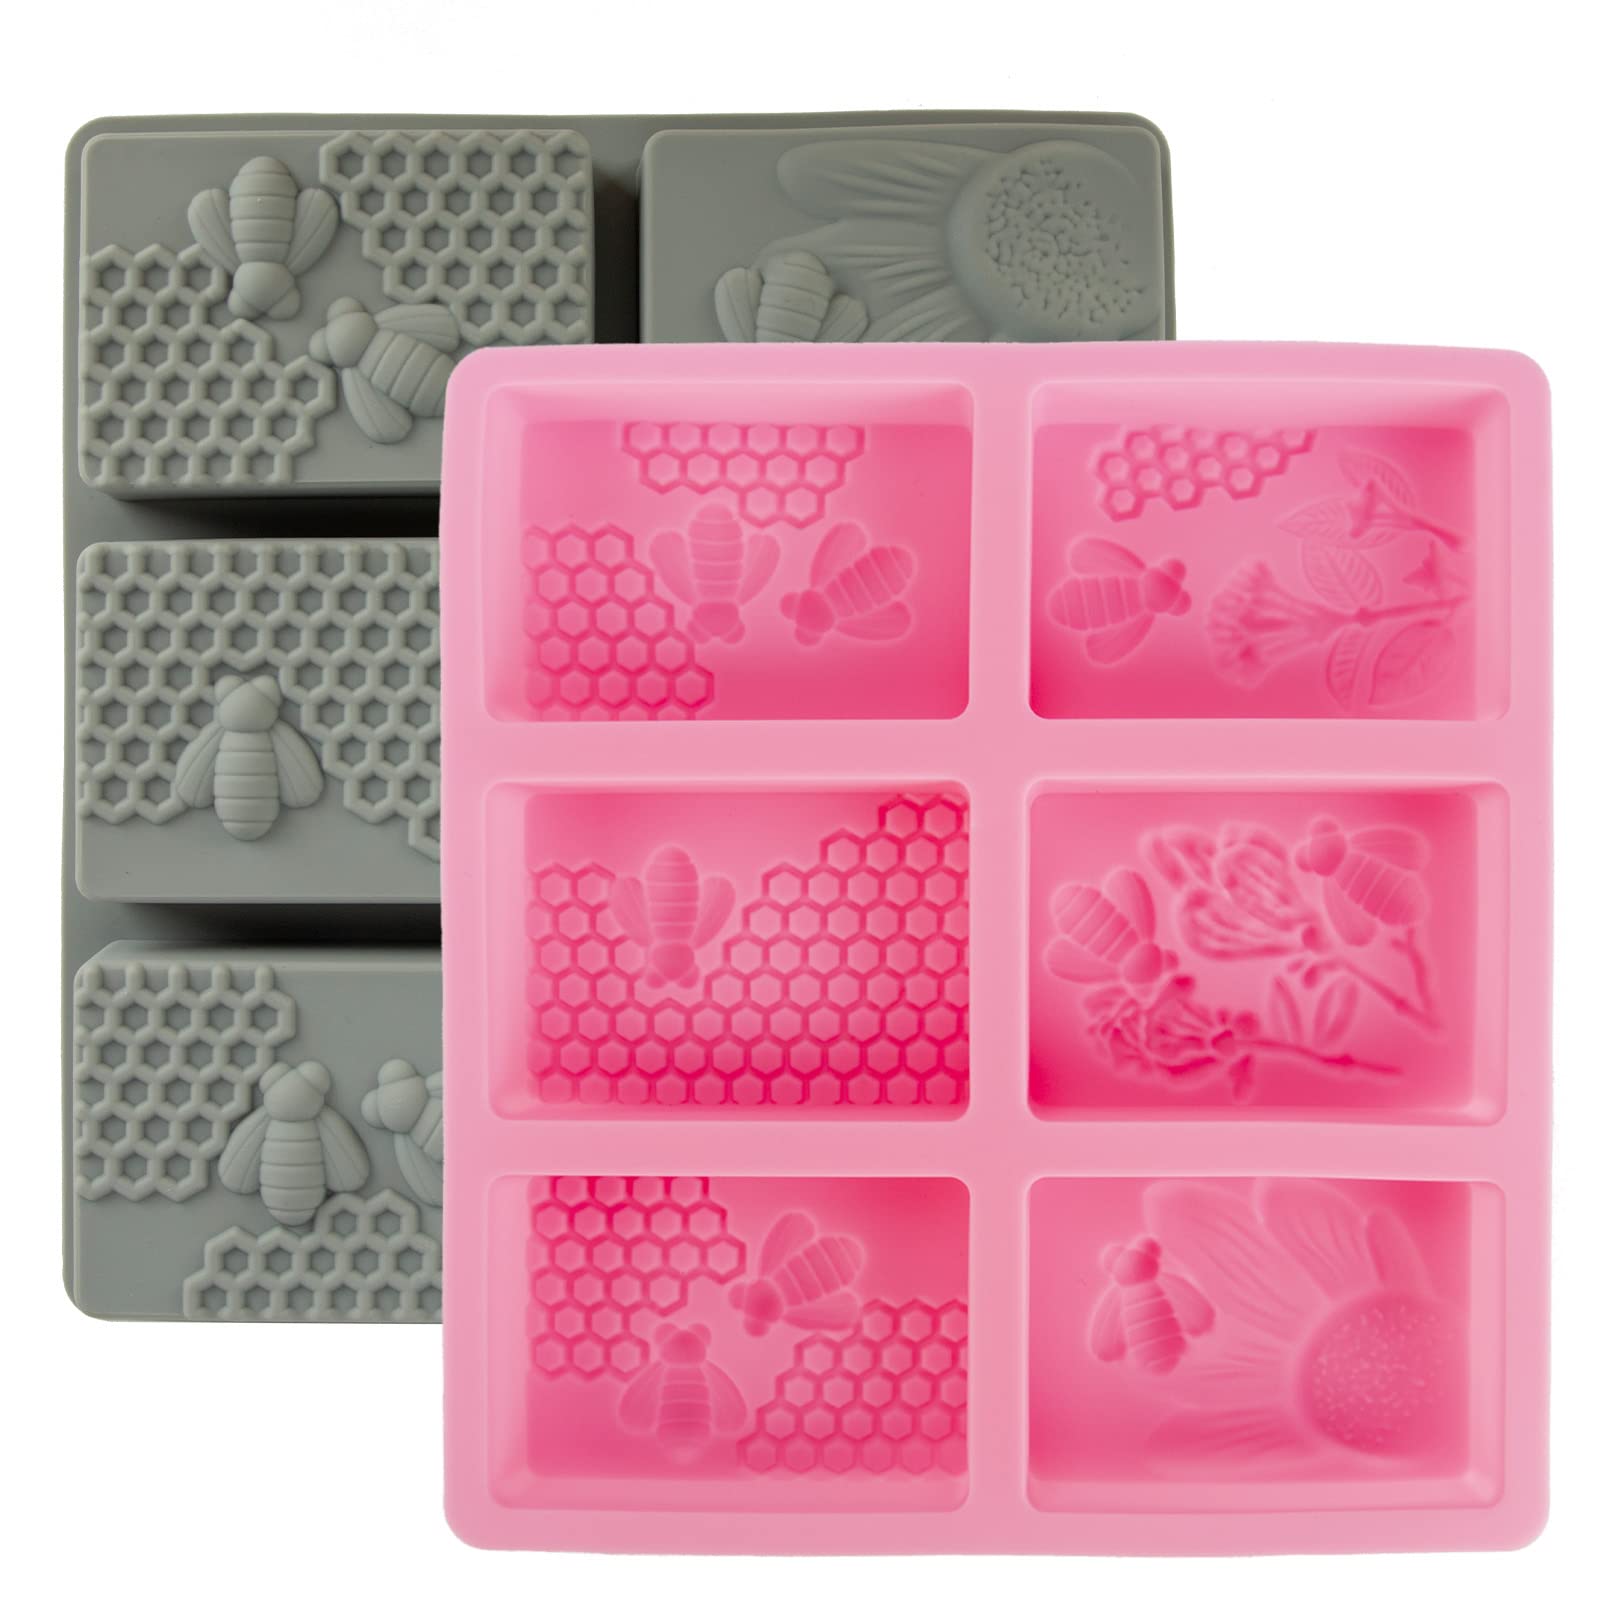 8 Butterfly Cake Mold Silicone Chocolate Baking Molds Butterfly Shape Ice  Cube Tray For Baking Cake Soap Bread Muffin Mold